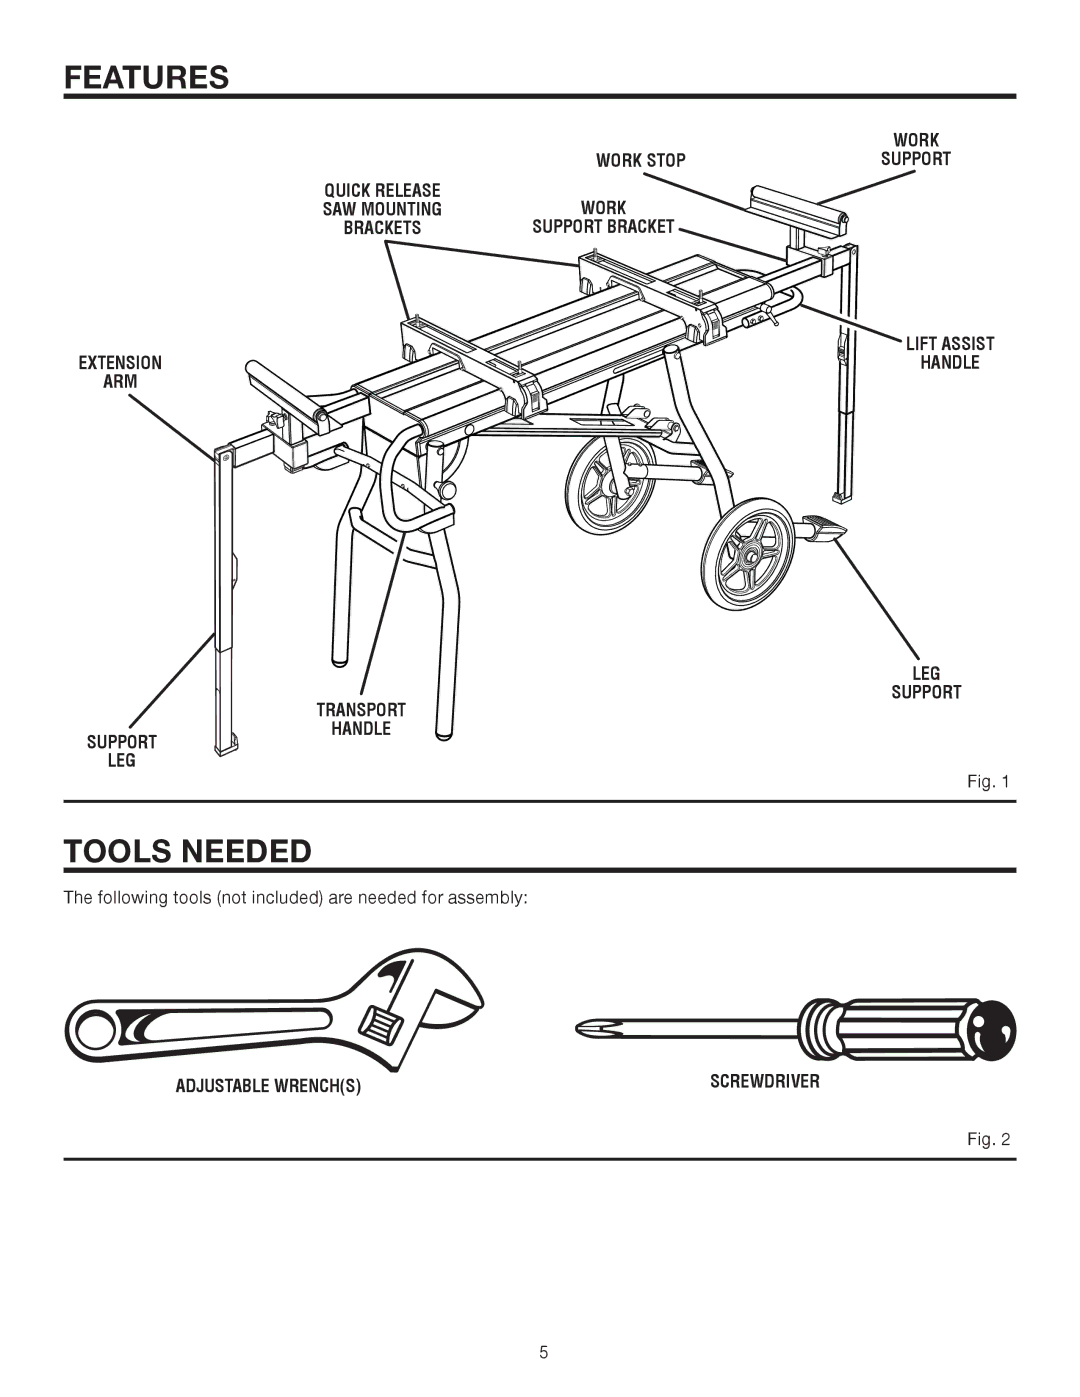 RIDGID AC9944 manual Features, Tools Needed, Work Stop, LEG Support Transport Handle, Adjustable Wrenchs 